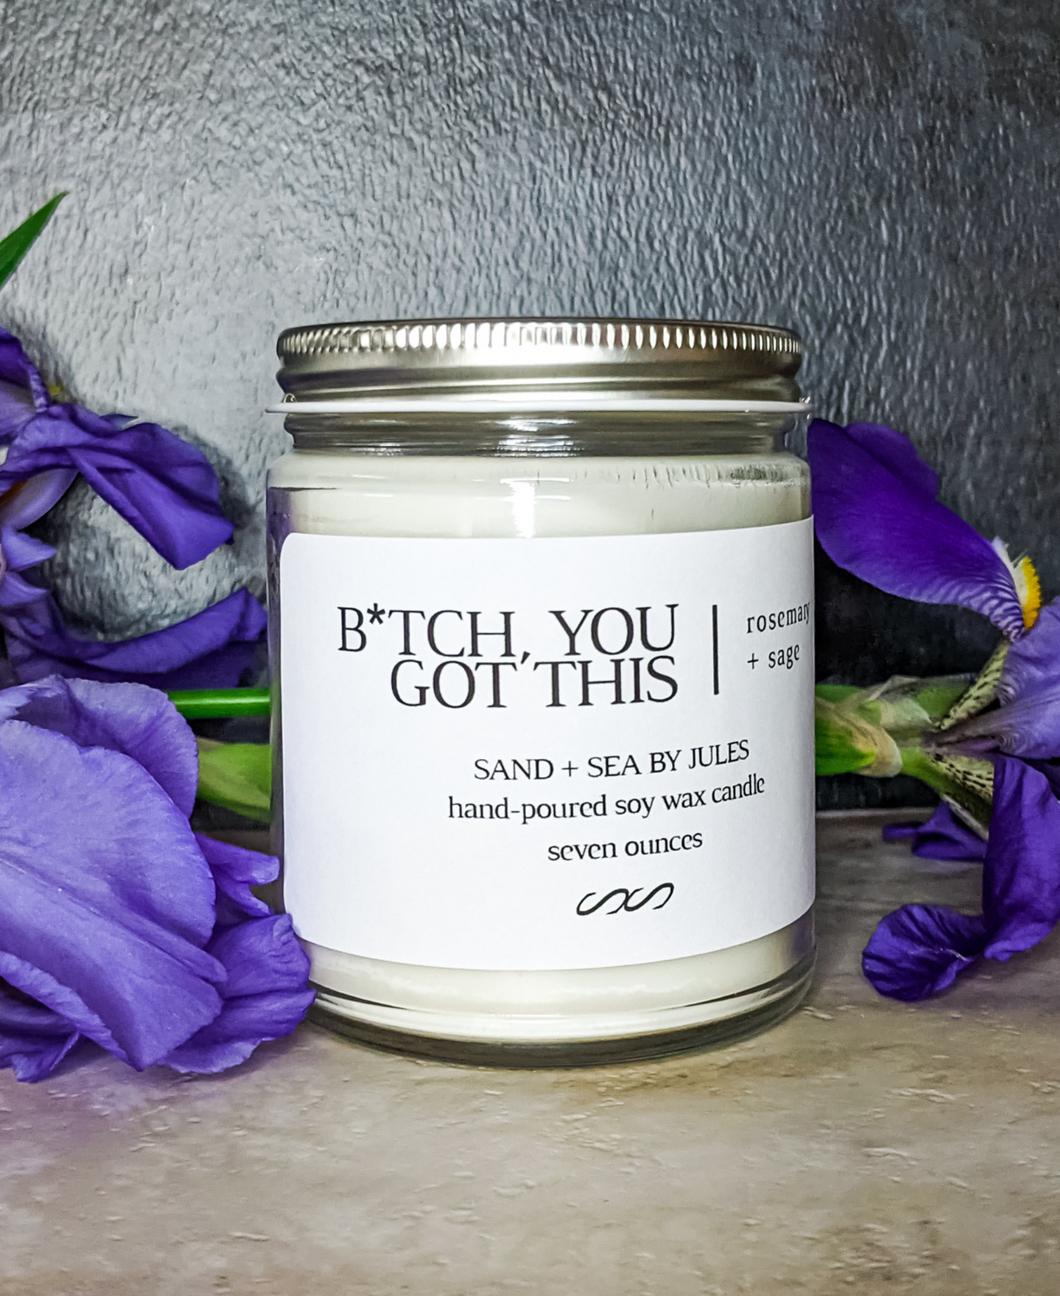 B*tch, You Got This: Rosemary + Sage